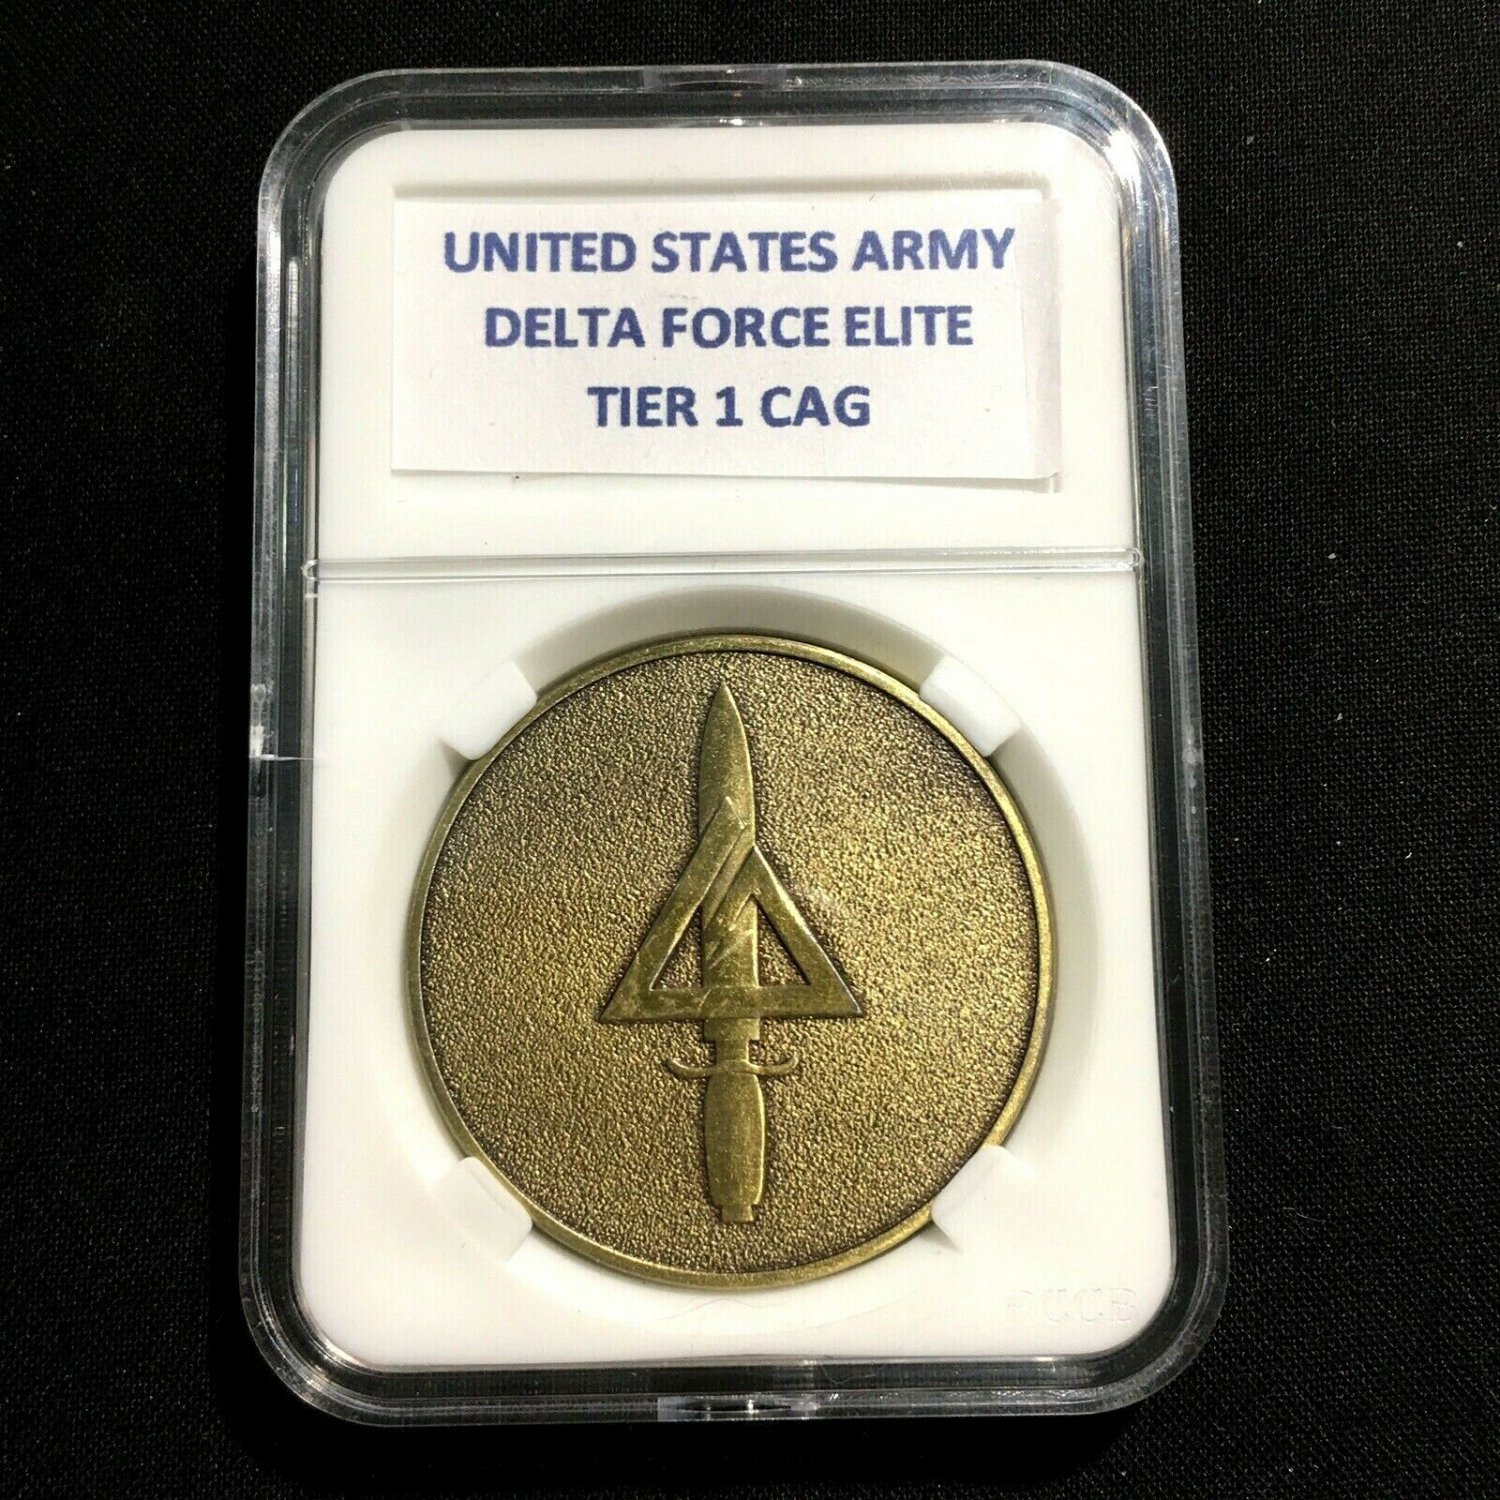 Delta Force Elite Tier 1 CAG Army Special Forces Challenge Coin Bronze